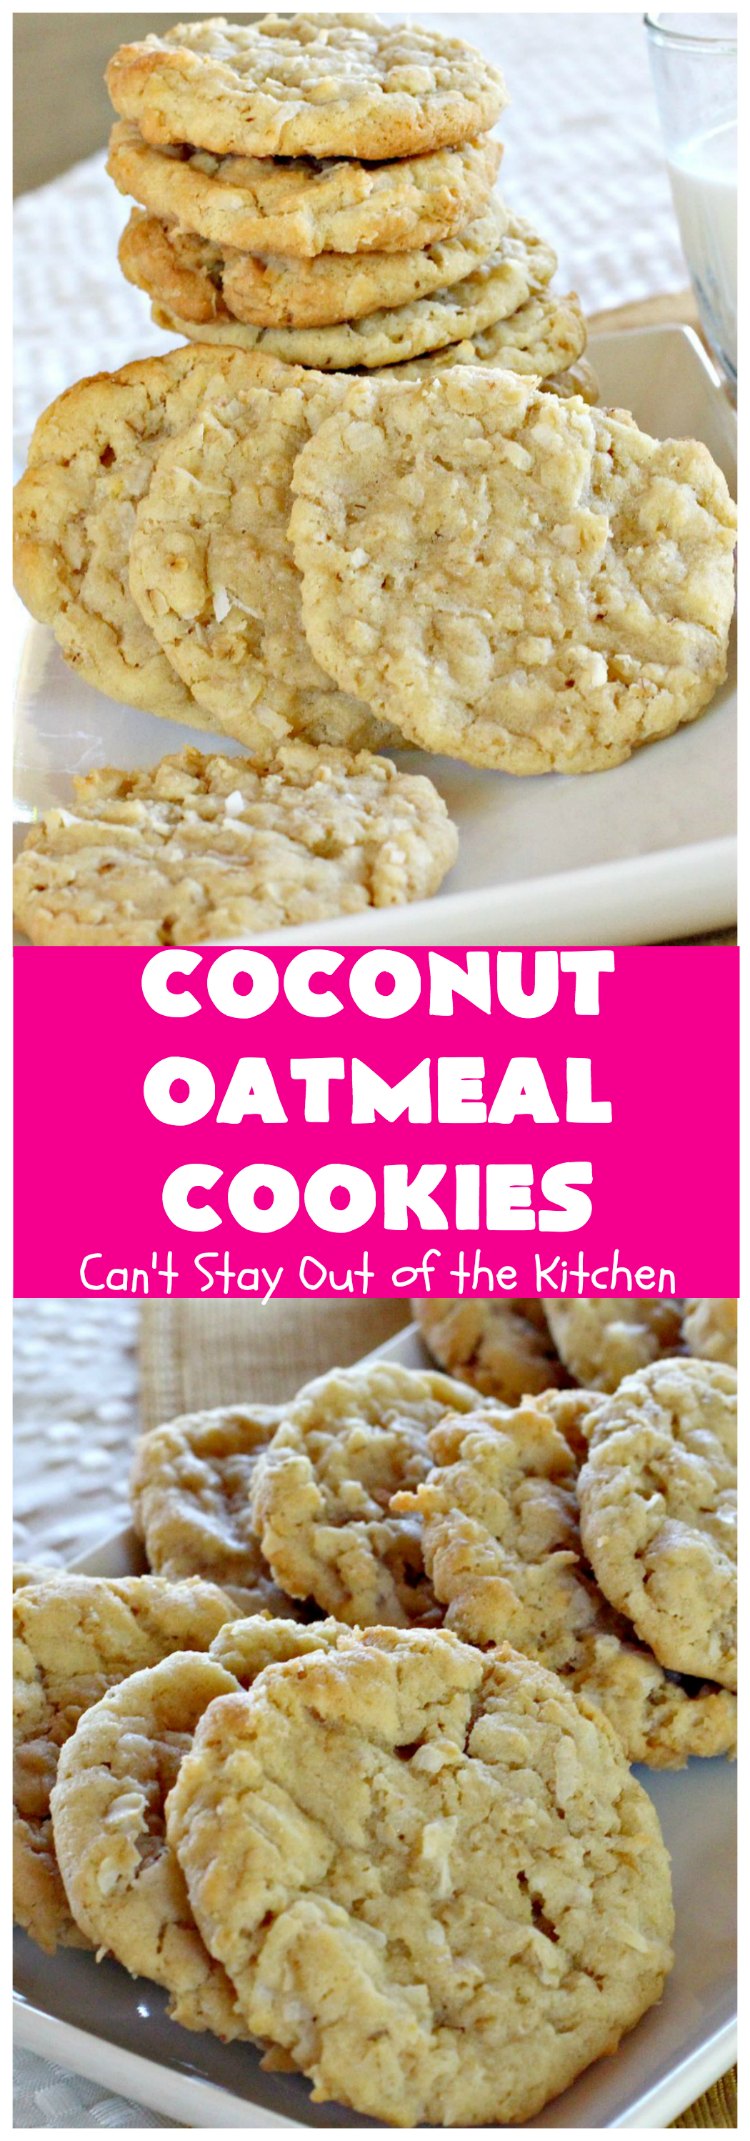 Coconut Oatmeal Cookies | Can't Stay Out of the Kitchen